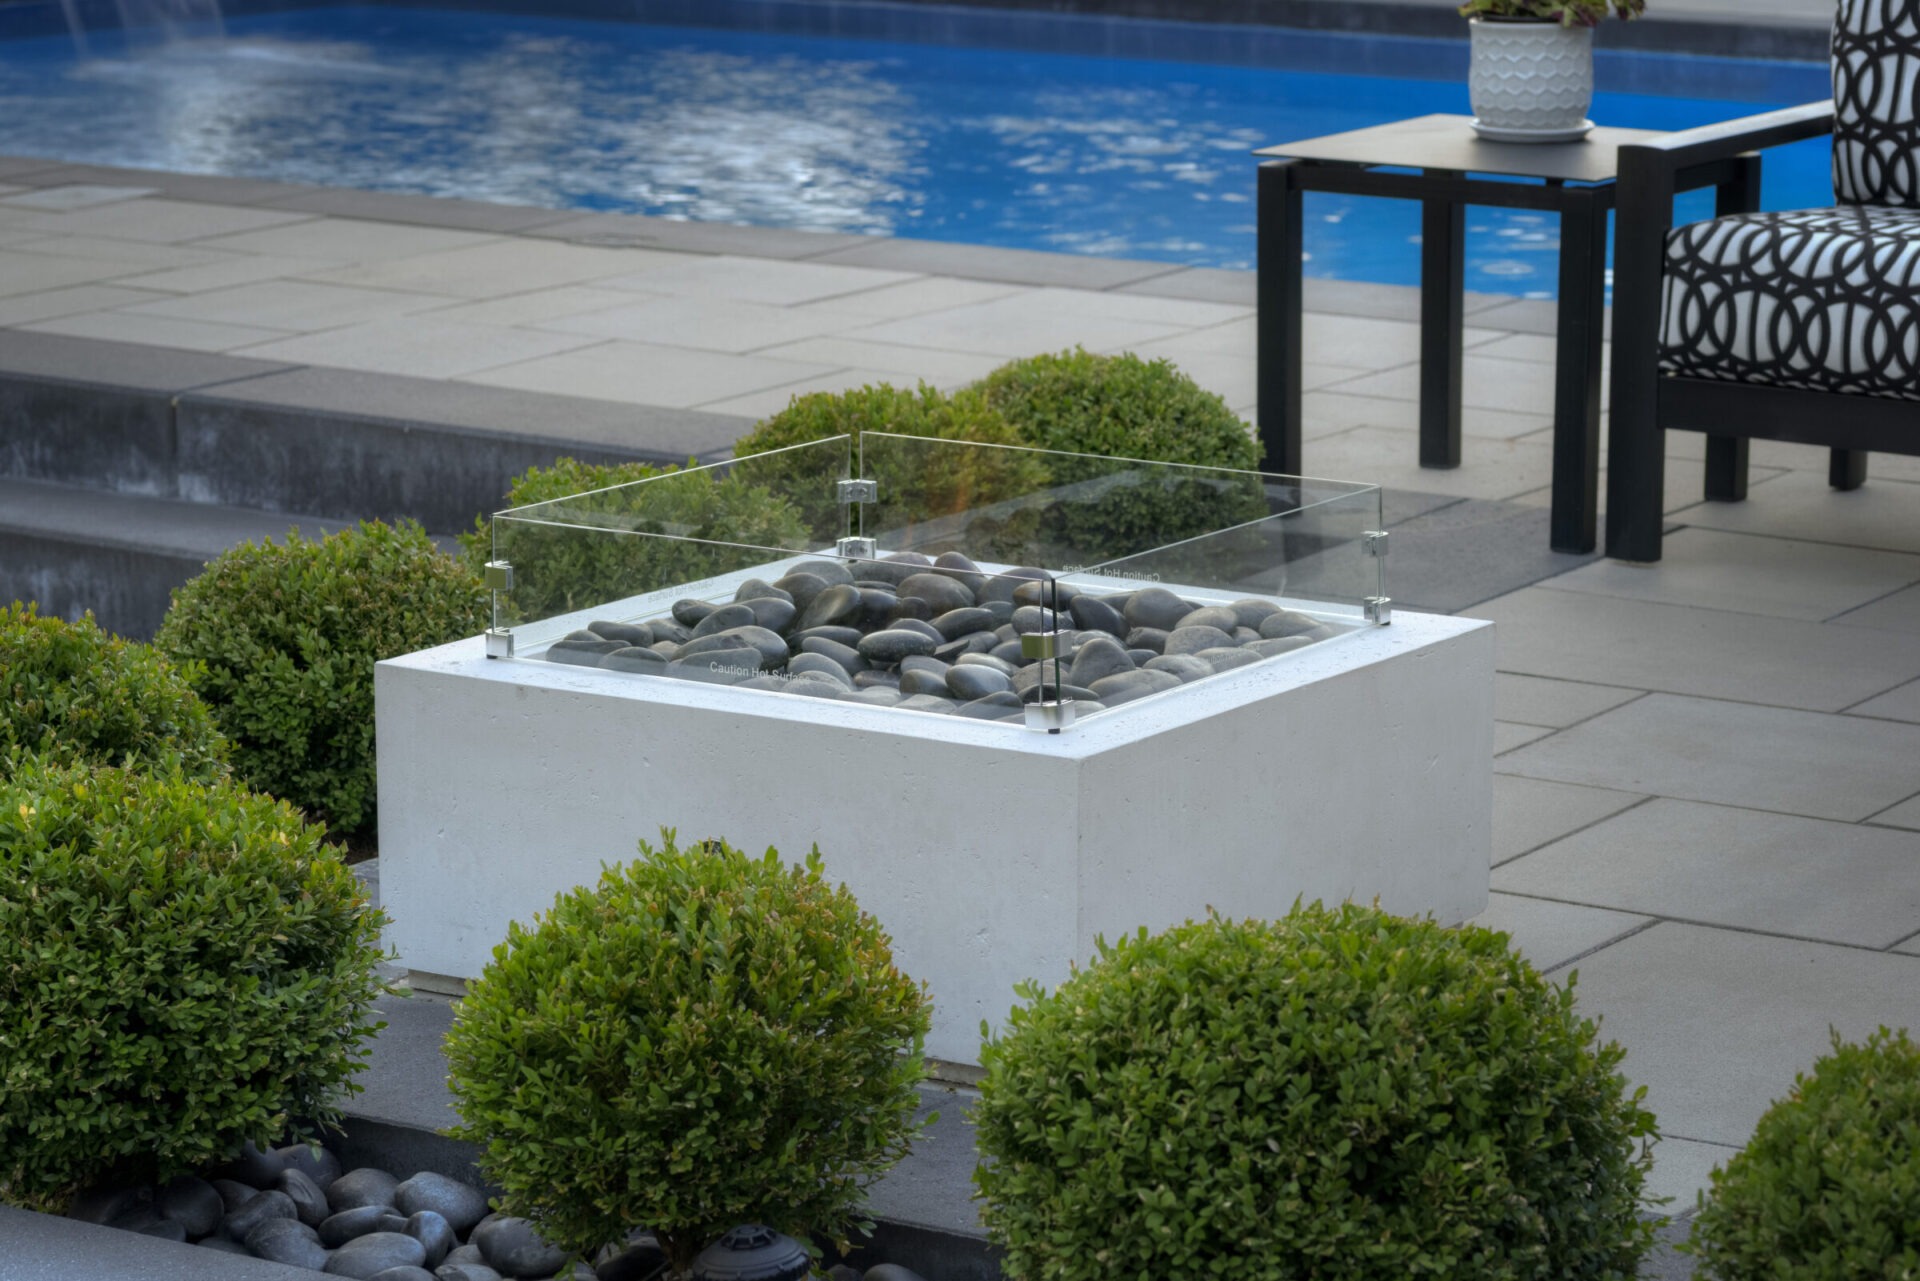 This is an outdoor setting featuring a patio with a fire pit containing grey stones, neat hedges, garden furniture beside a swimming pool.